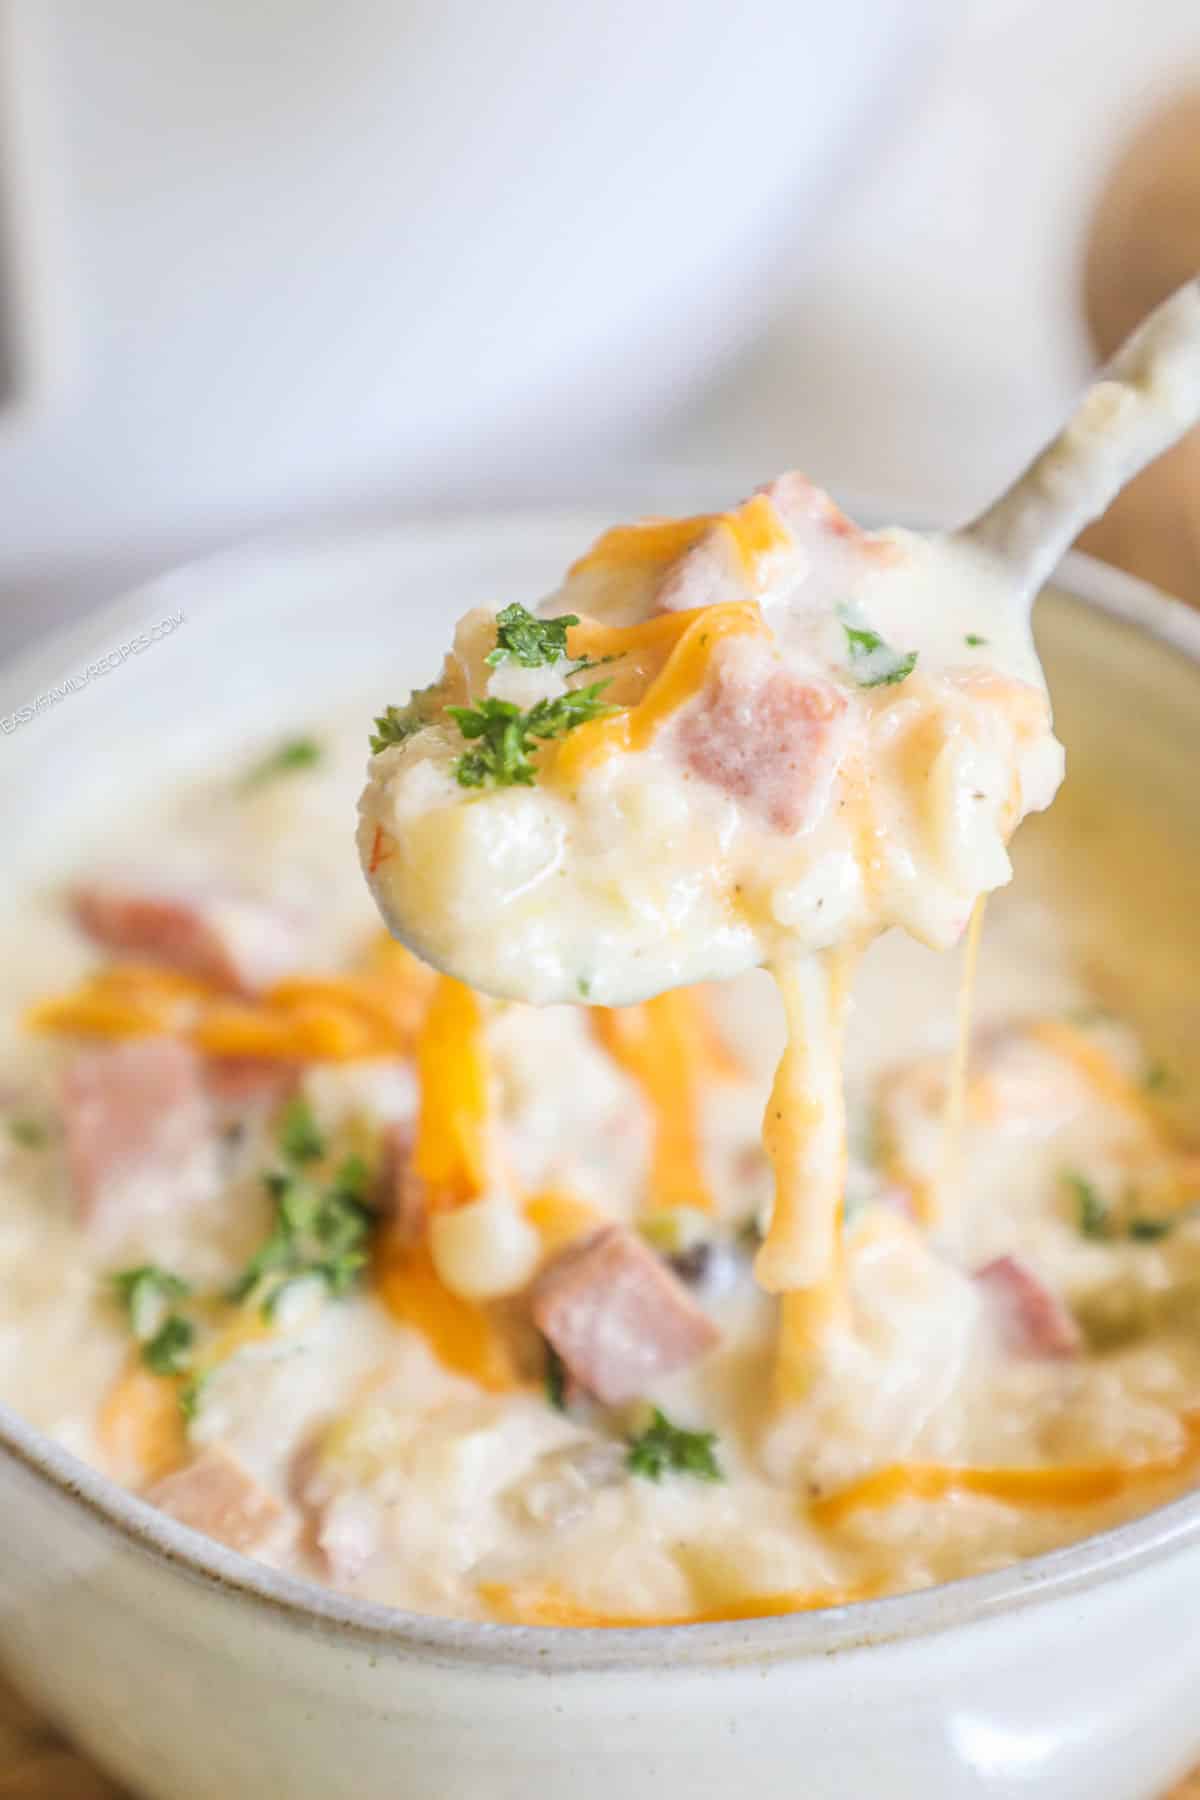 A spoon scooping up a bite of creamy potato soup with ham that's topped with cheddar cheese.